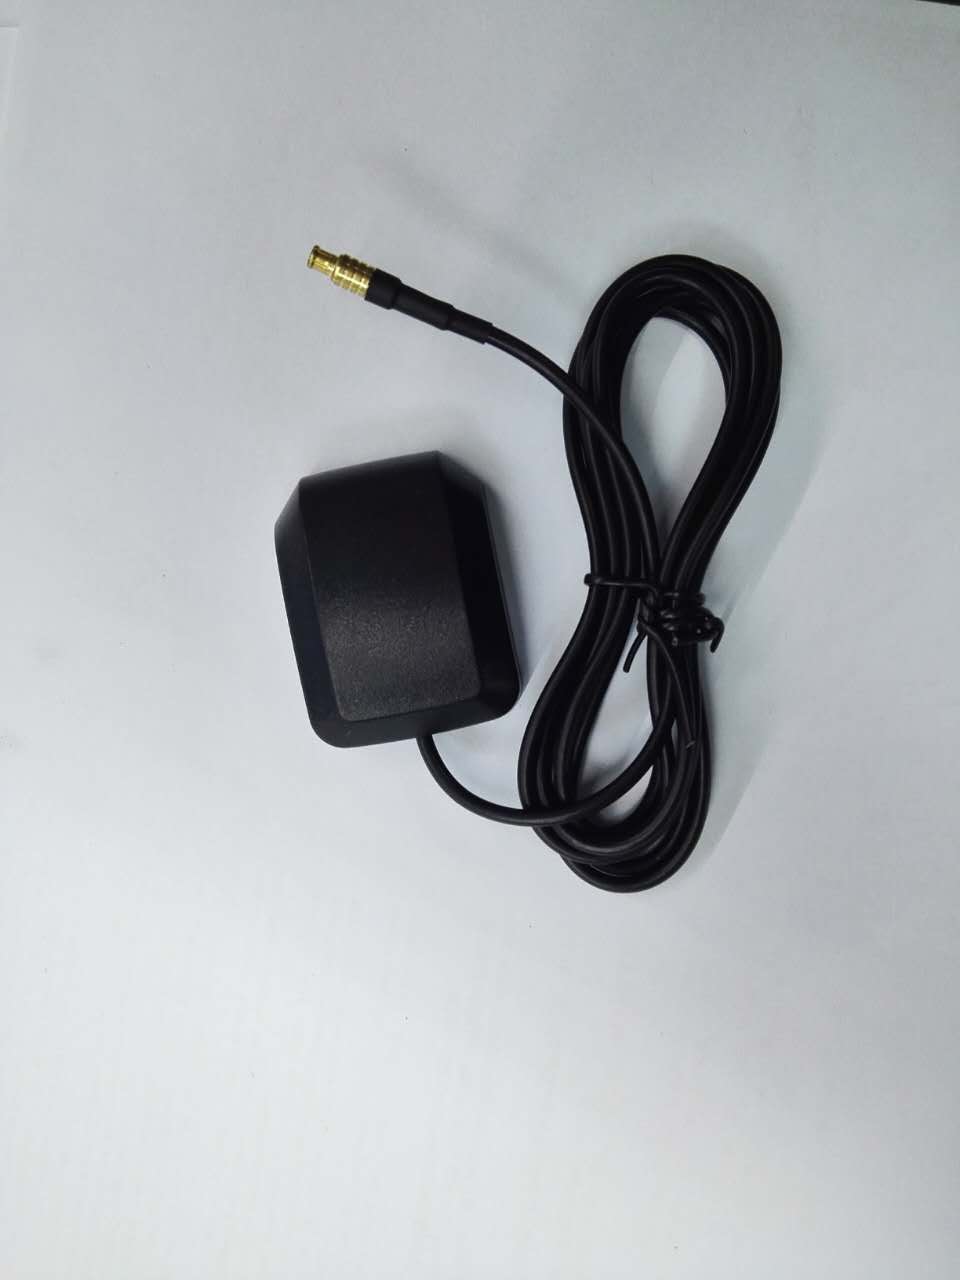 MCX GPS Antenna Active Amplifier 3 Metres of Cable With Mag-Moun